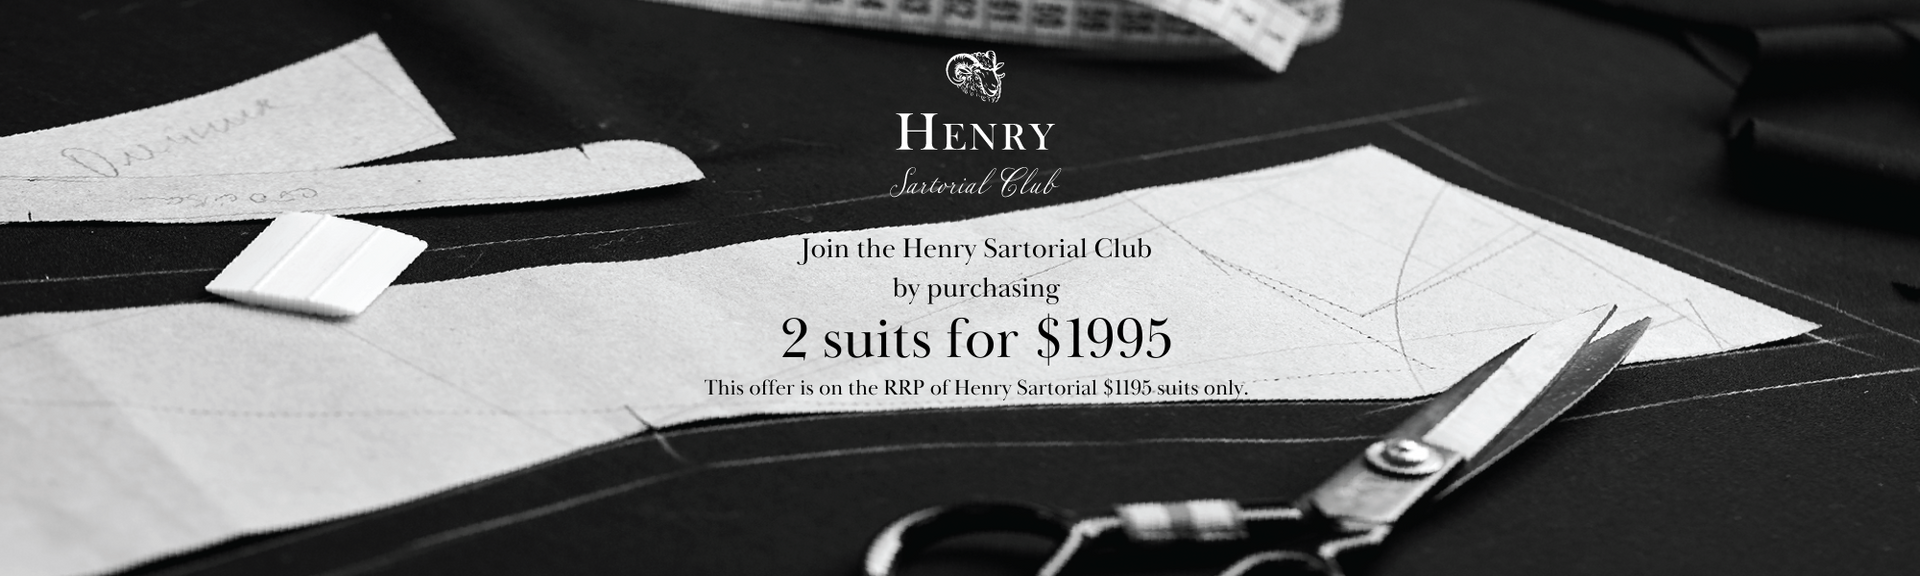 Henry Sartorial Club Offer Deal - 2 Suits For $1,995